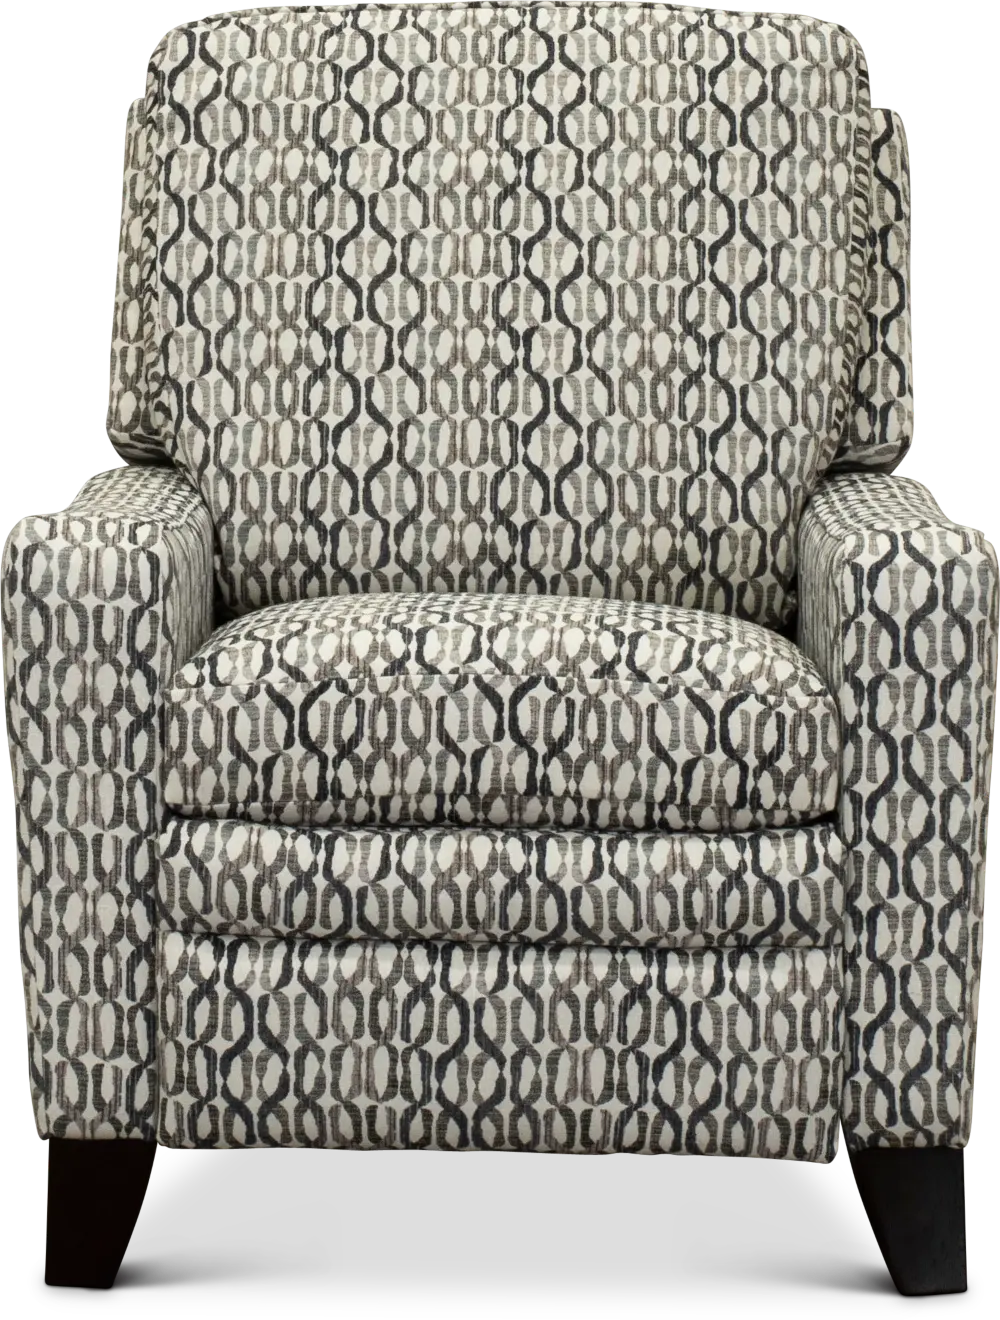 P25-439/D149452/PREC Greystone Low Profile Navy Blue and Gray Power Recliner - Cabot-1